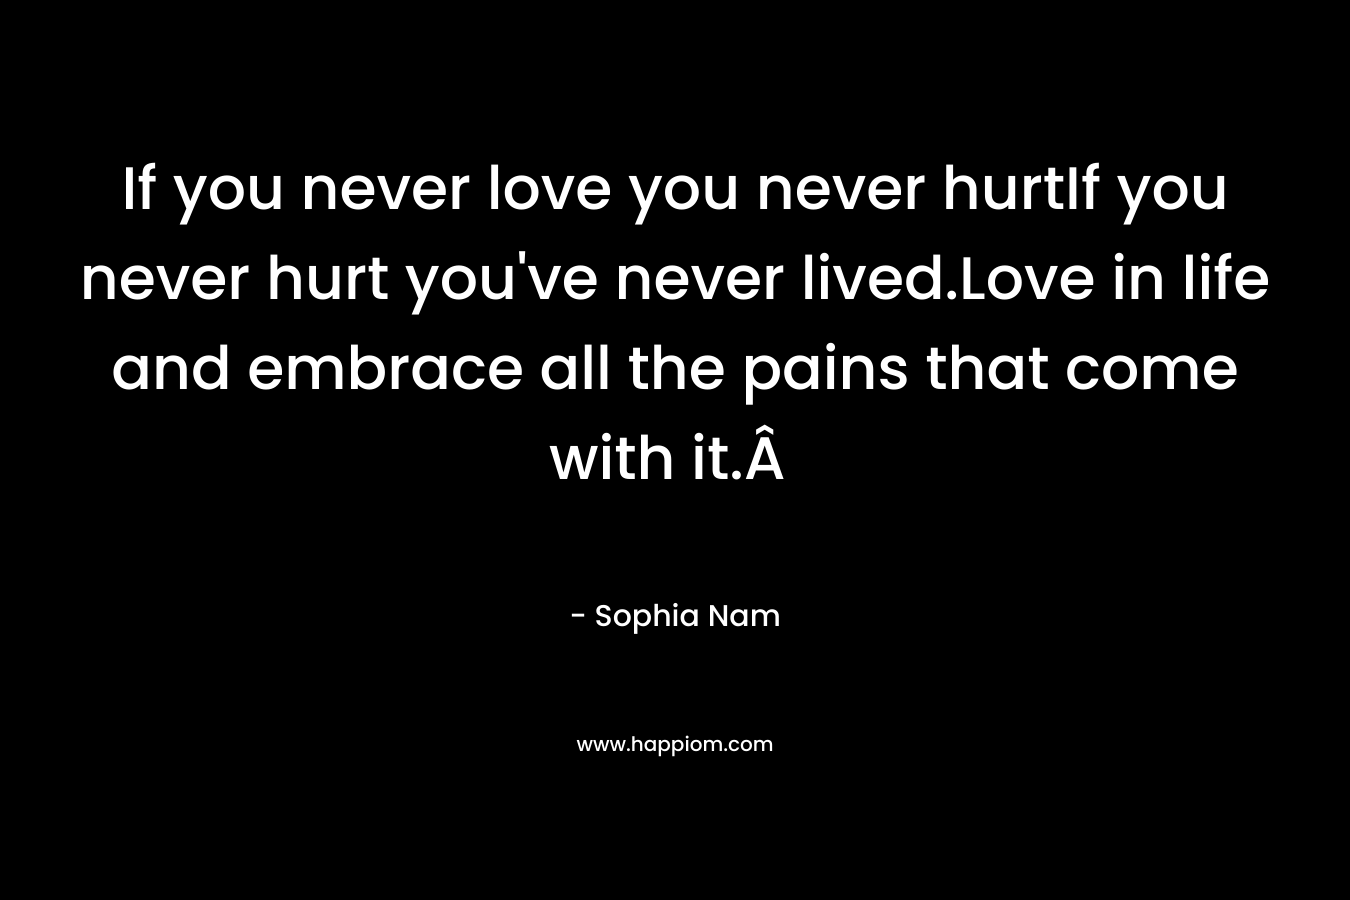 If you never love you never hurtIf you never hurt you've never lived.Love in life and embrace all the pains that come with it.Â 